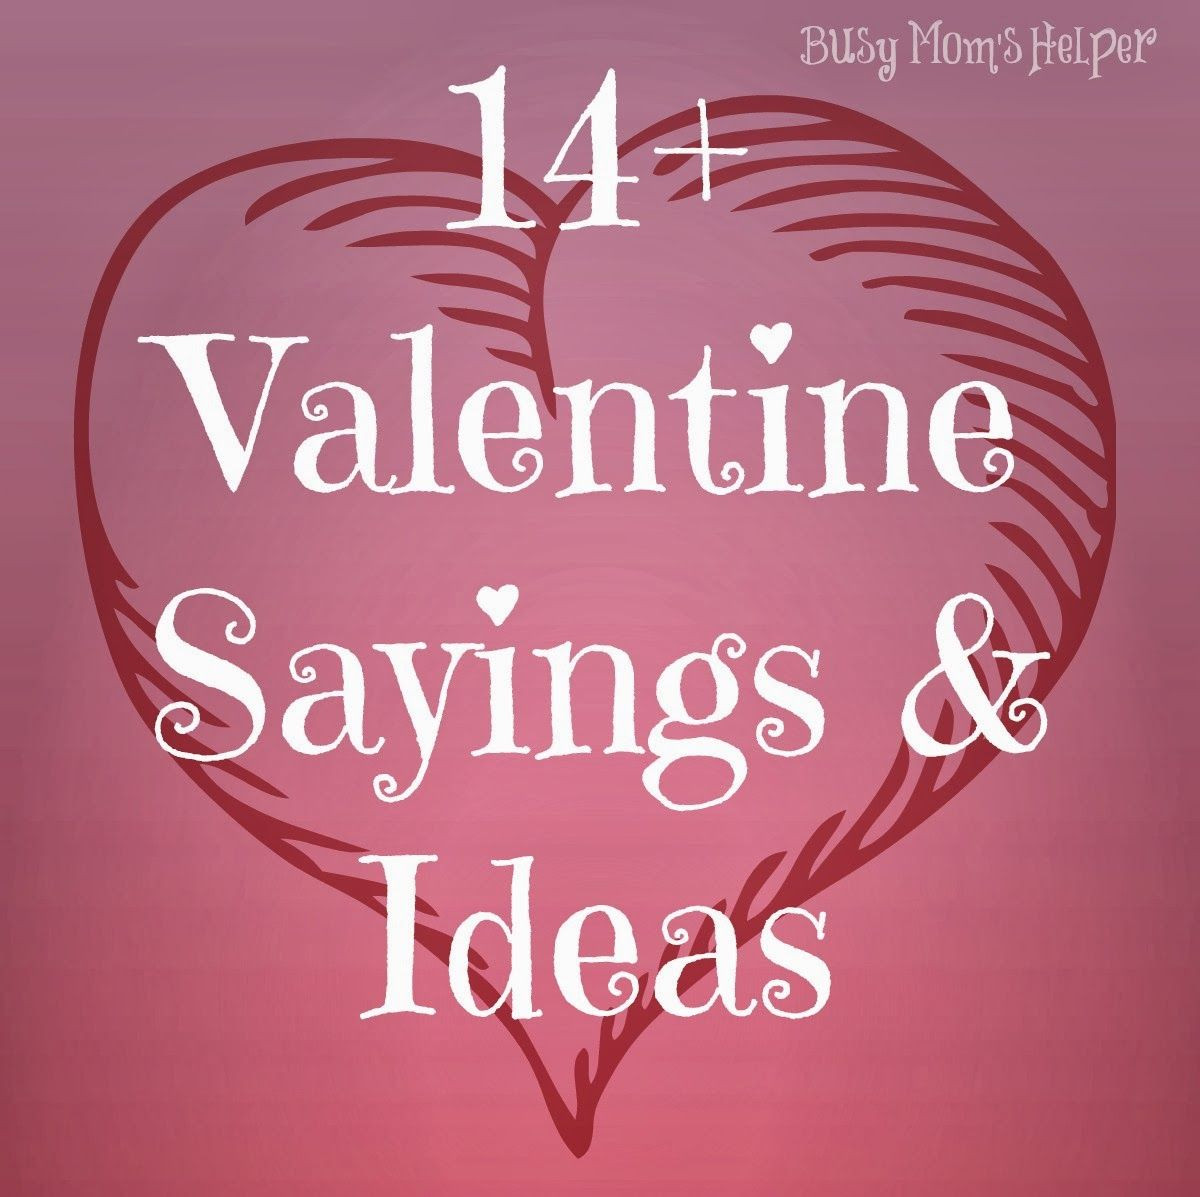 Quotes For Valentines Day Cards
 14 Gifts of Valentines with Free Printables plus MORE